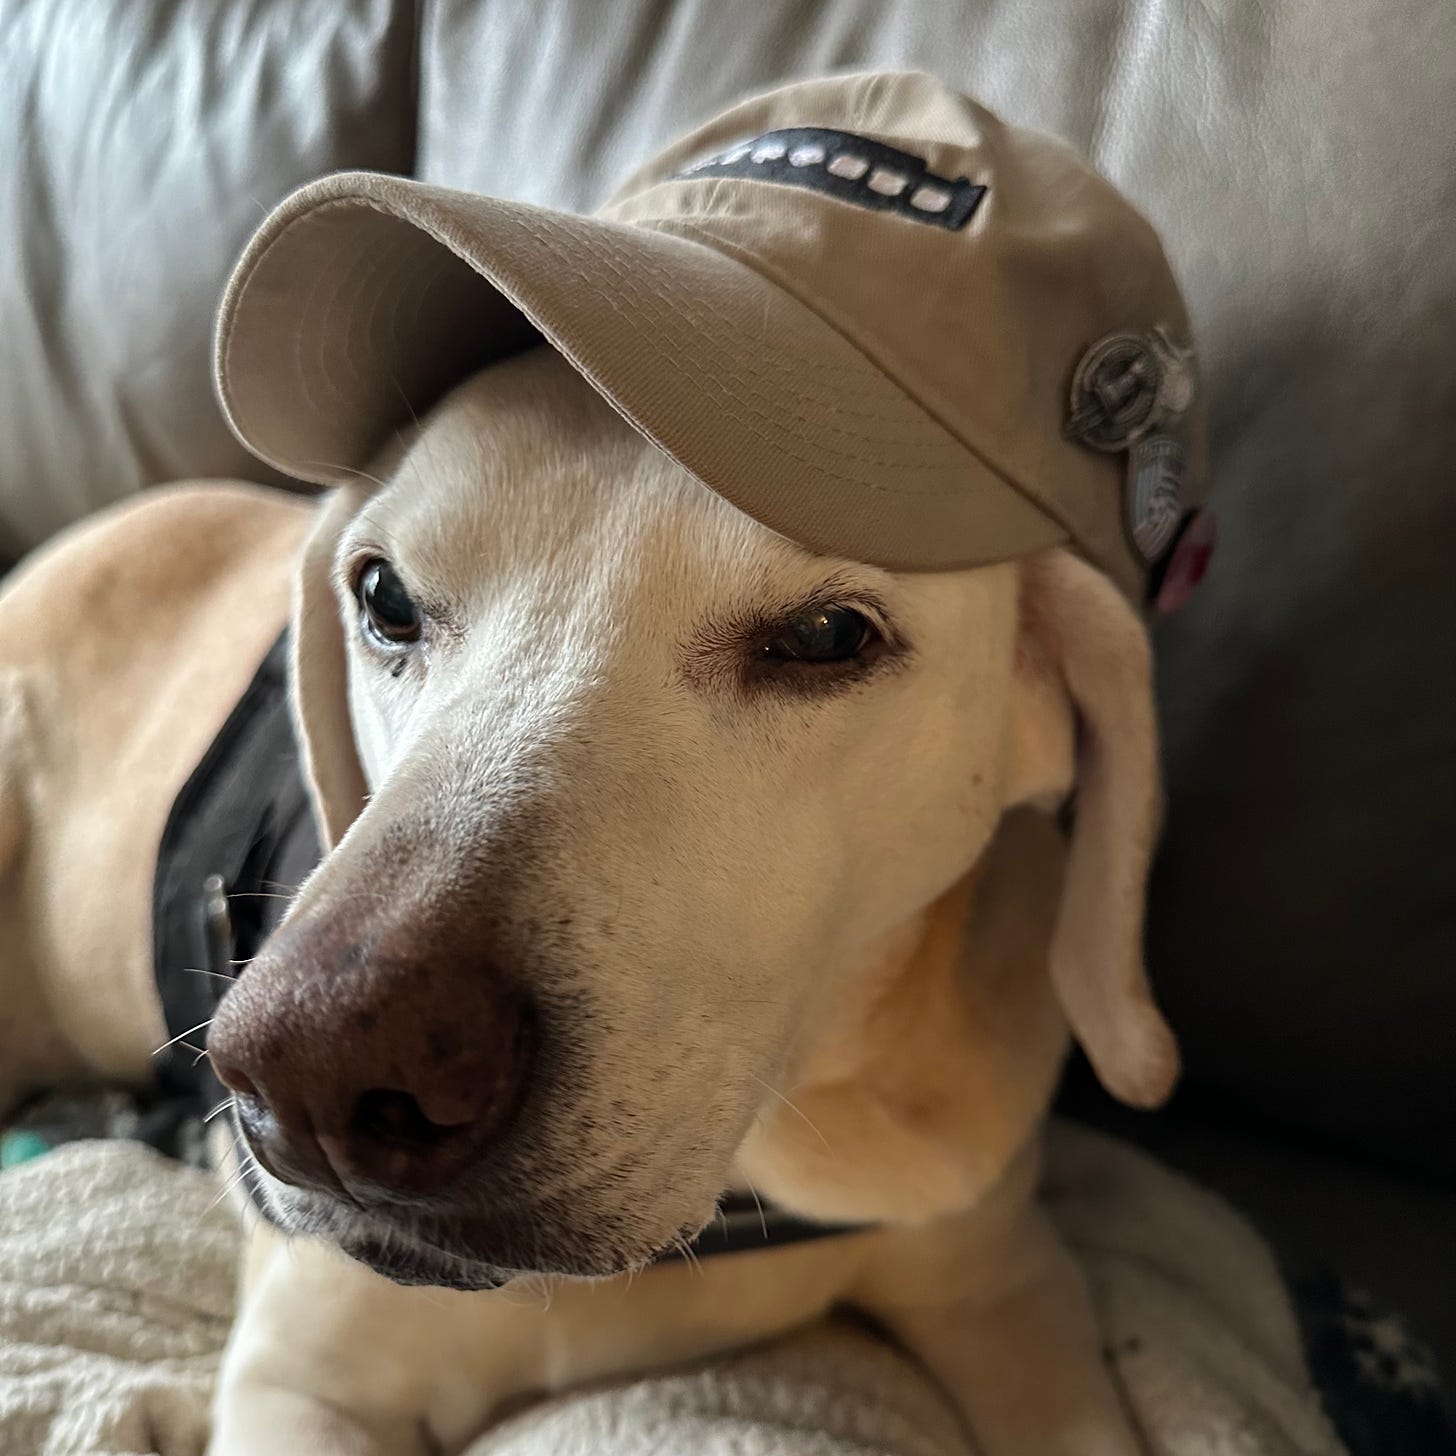 A dog laying on a sofa, wearing a baseball cap with the 100 Harmonicas logo stitched in front. The cap is tan and the dog is a short hair Vizula-mix named Zoey. Zoey is 14 years old so she is mostly white or very light tan, aging from her origina; deep red coat.